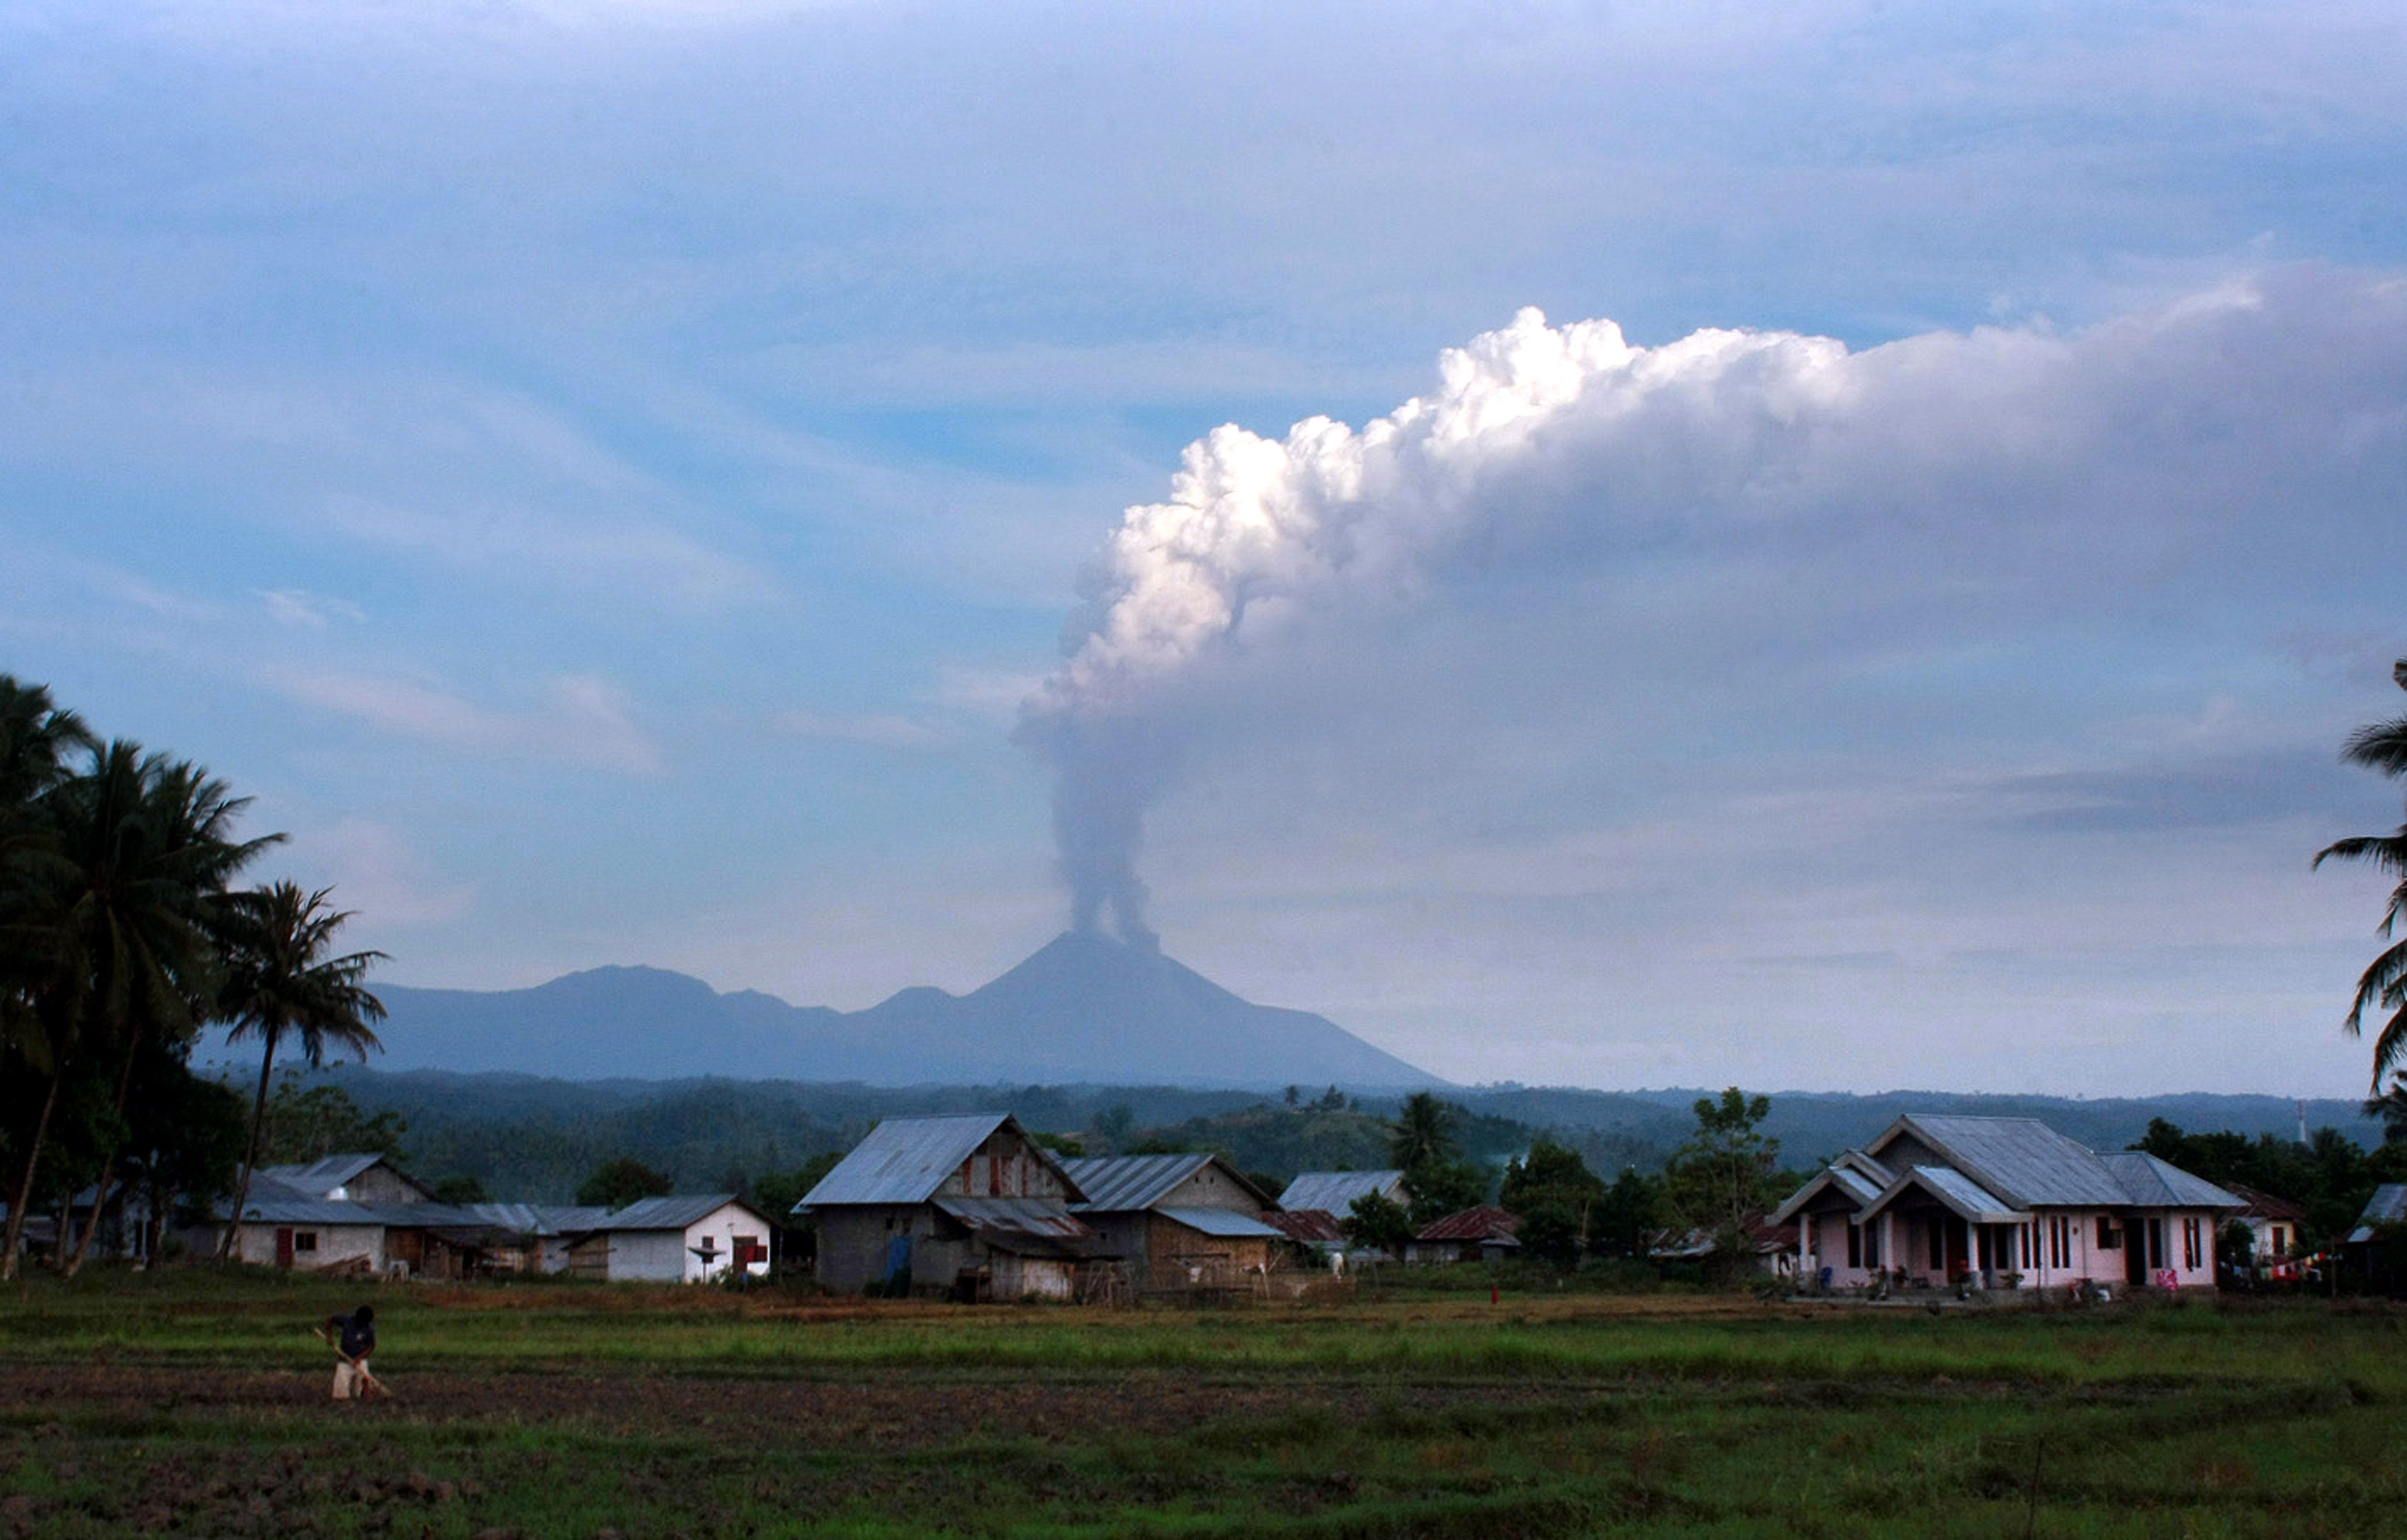 An Indonesian official raised the alert status to the second-highest level, level III also named Siaga, after Soputan volcano spewed ash until a level of 1200 meters. [Xinhua]